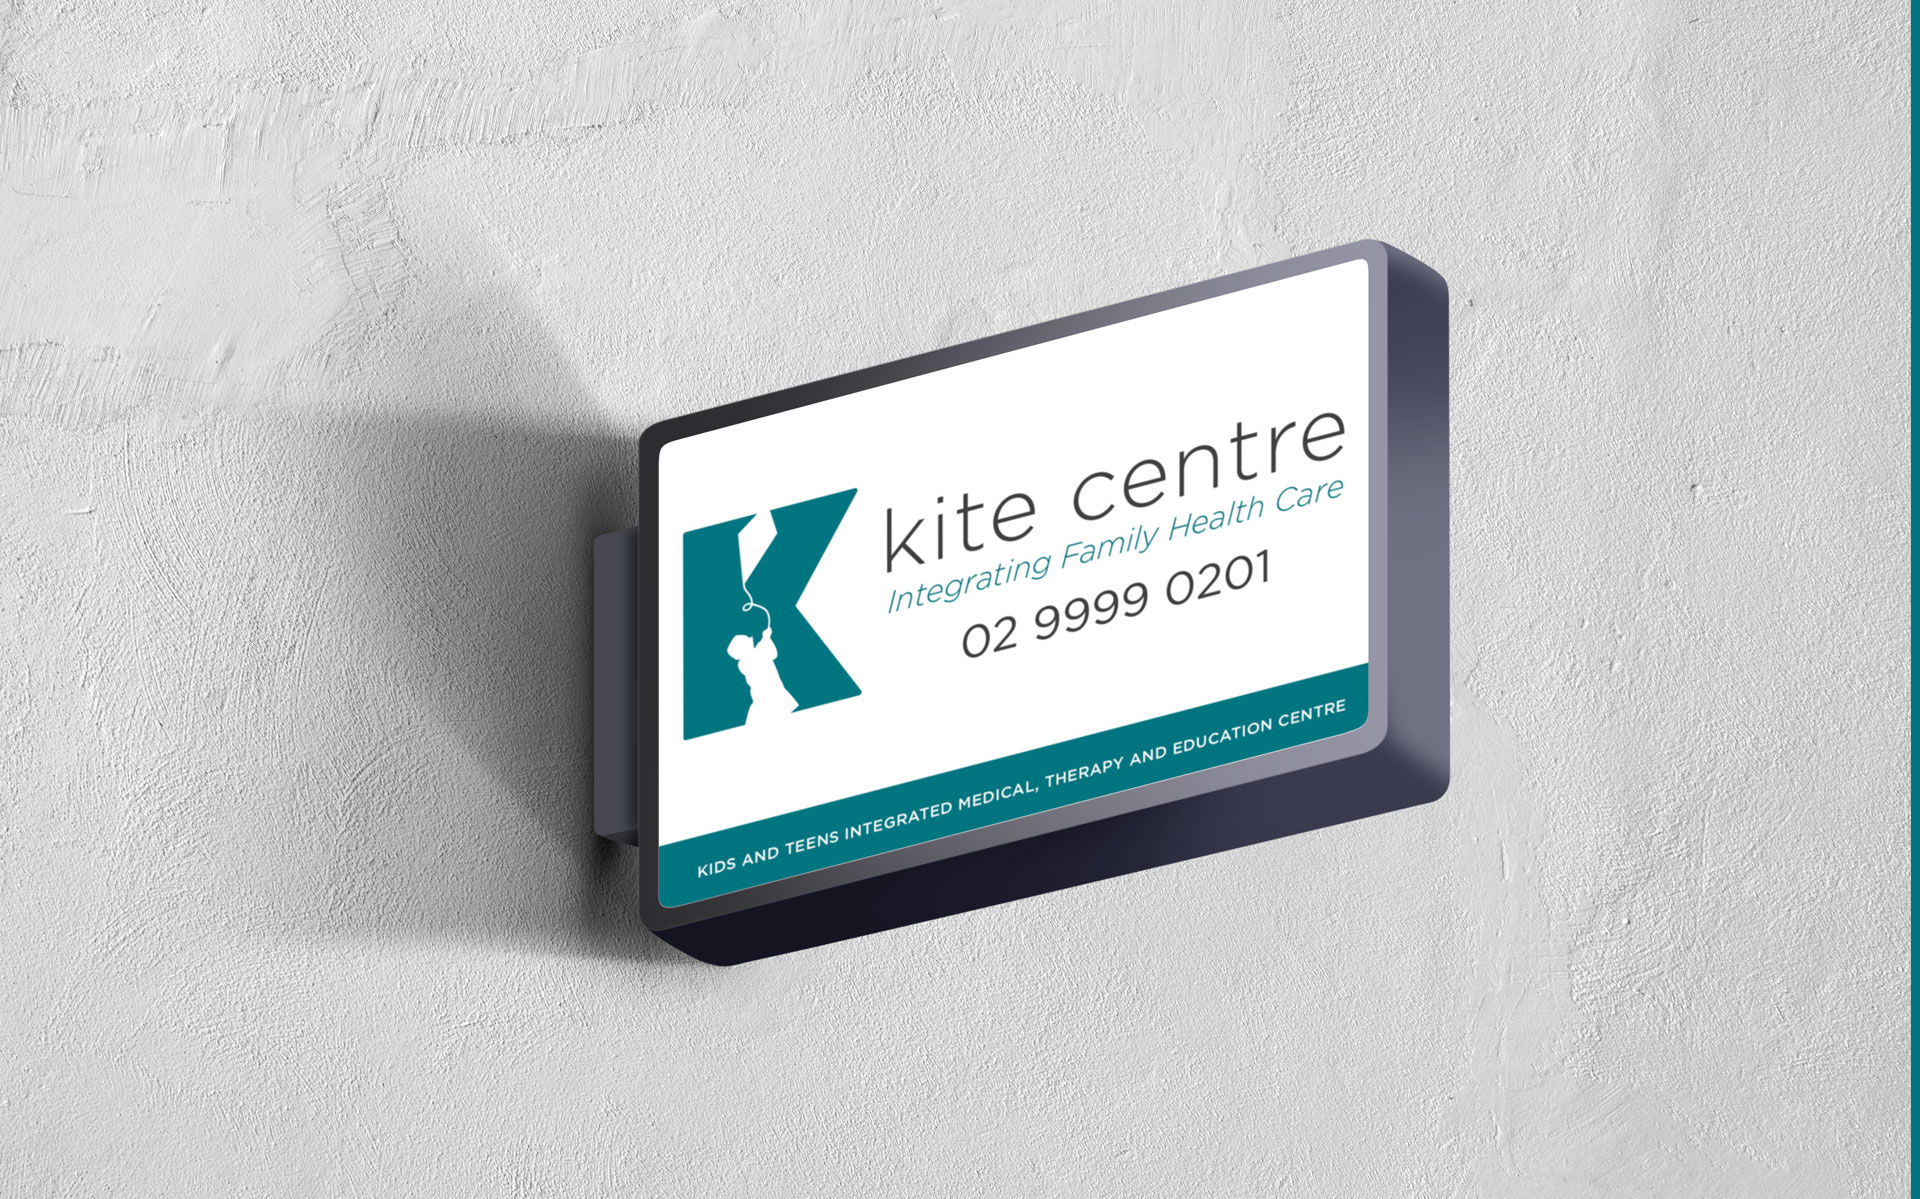 Kite Centre Branding & Marketing designed by Amy at Yellow Sunday